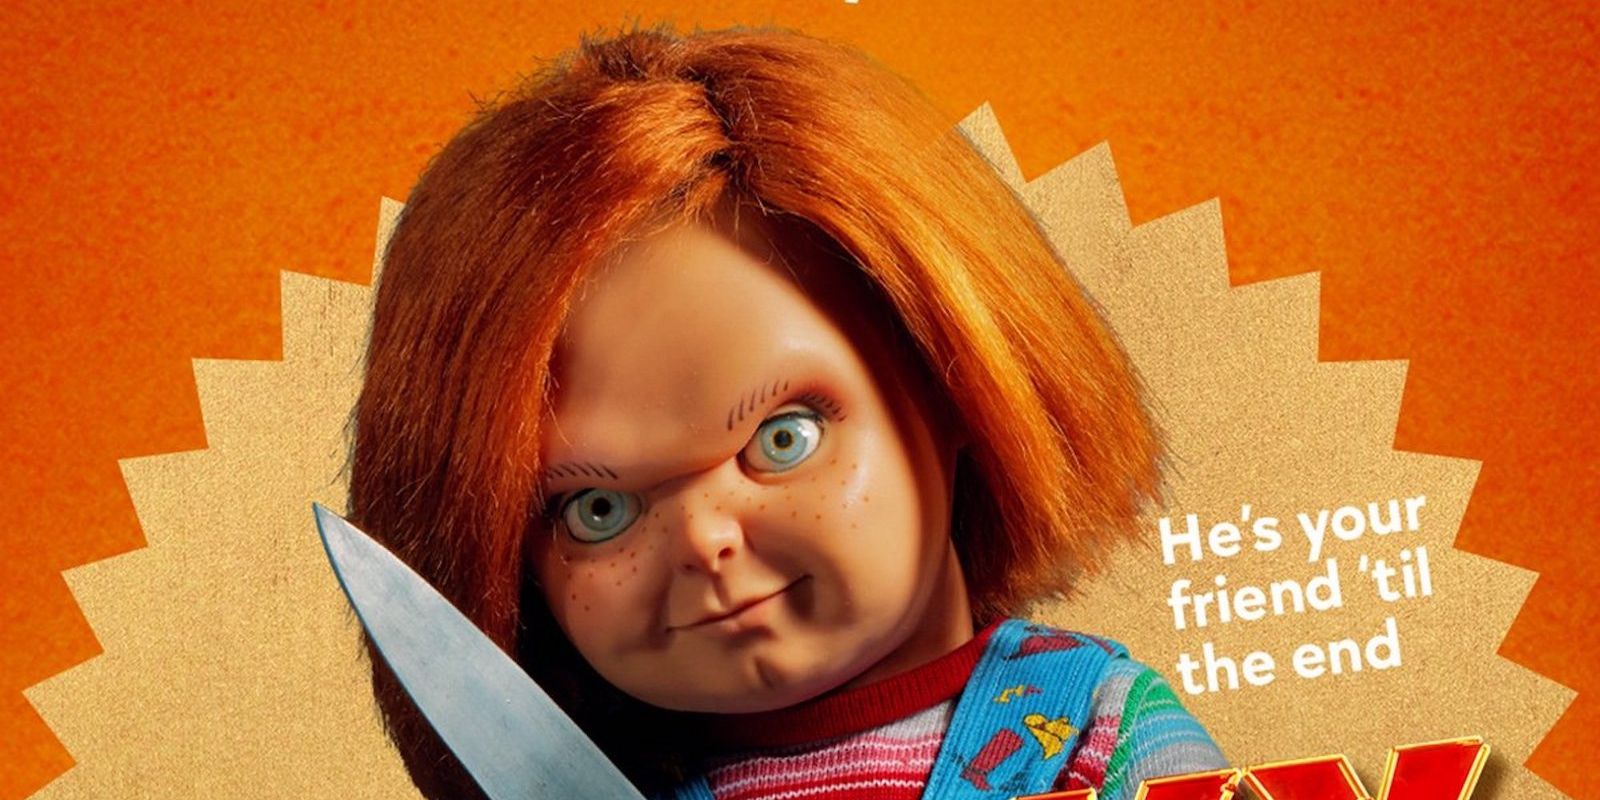 Chucky on a Barbie Parody Poster with his signature knife